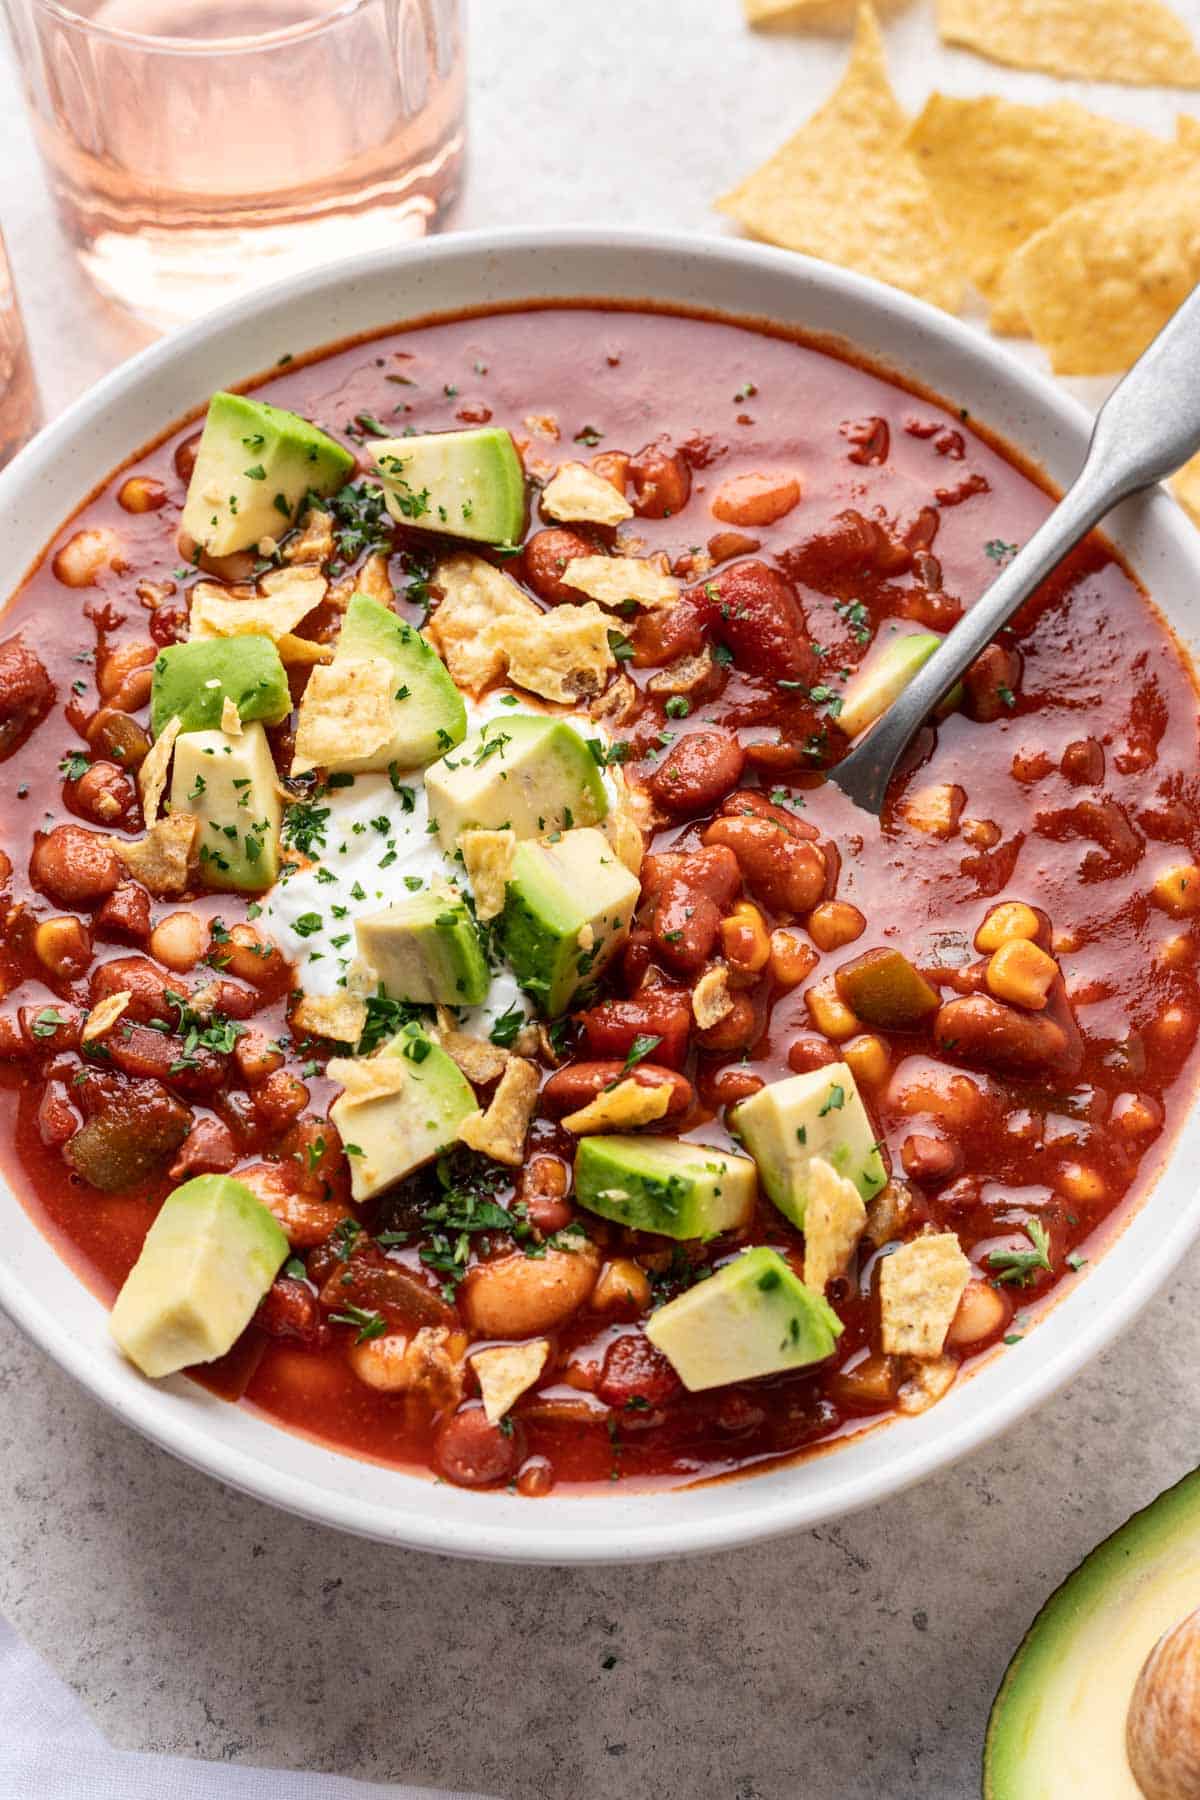 Bowl of vegan chili garnished with cubed avocado.